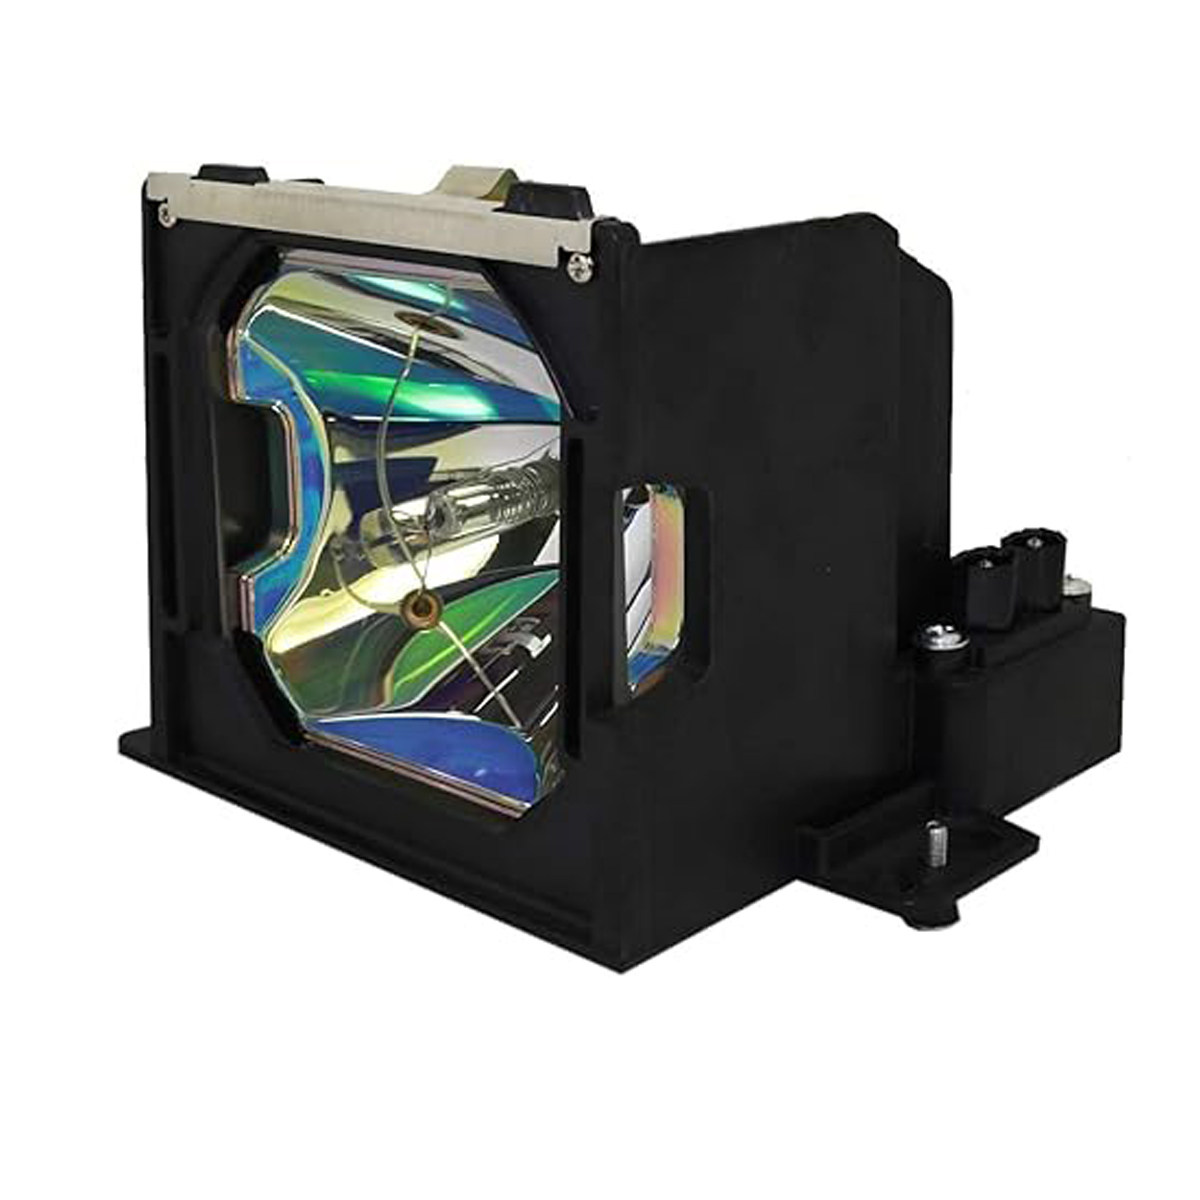 Replacement Projector lamp 3-120239-01 For  CHRISTIE LW300/VIVID LW300